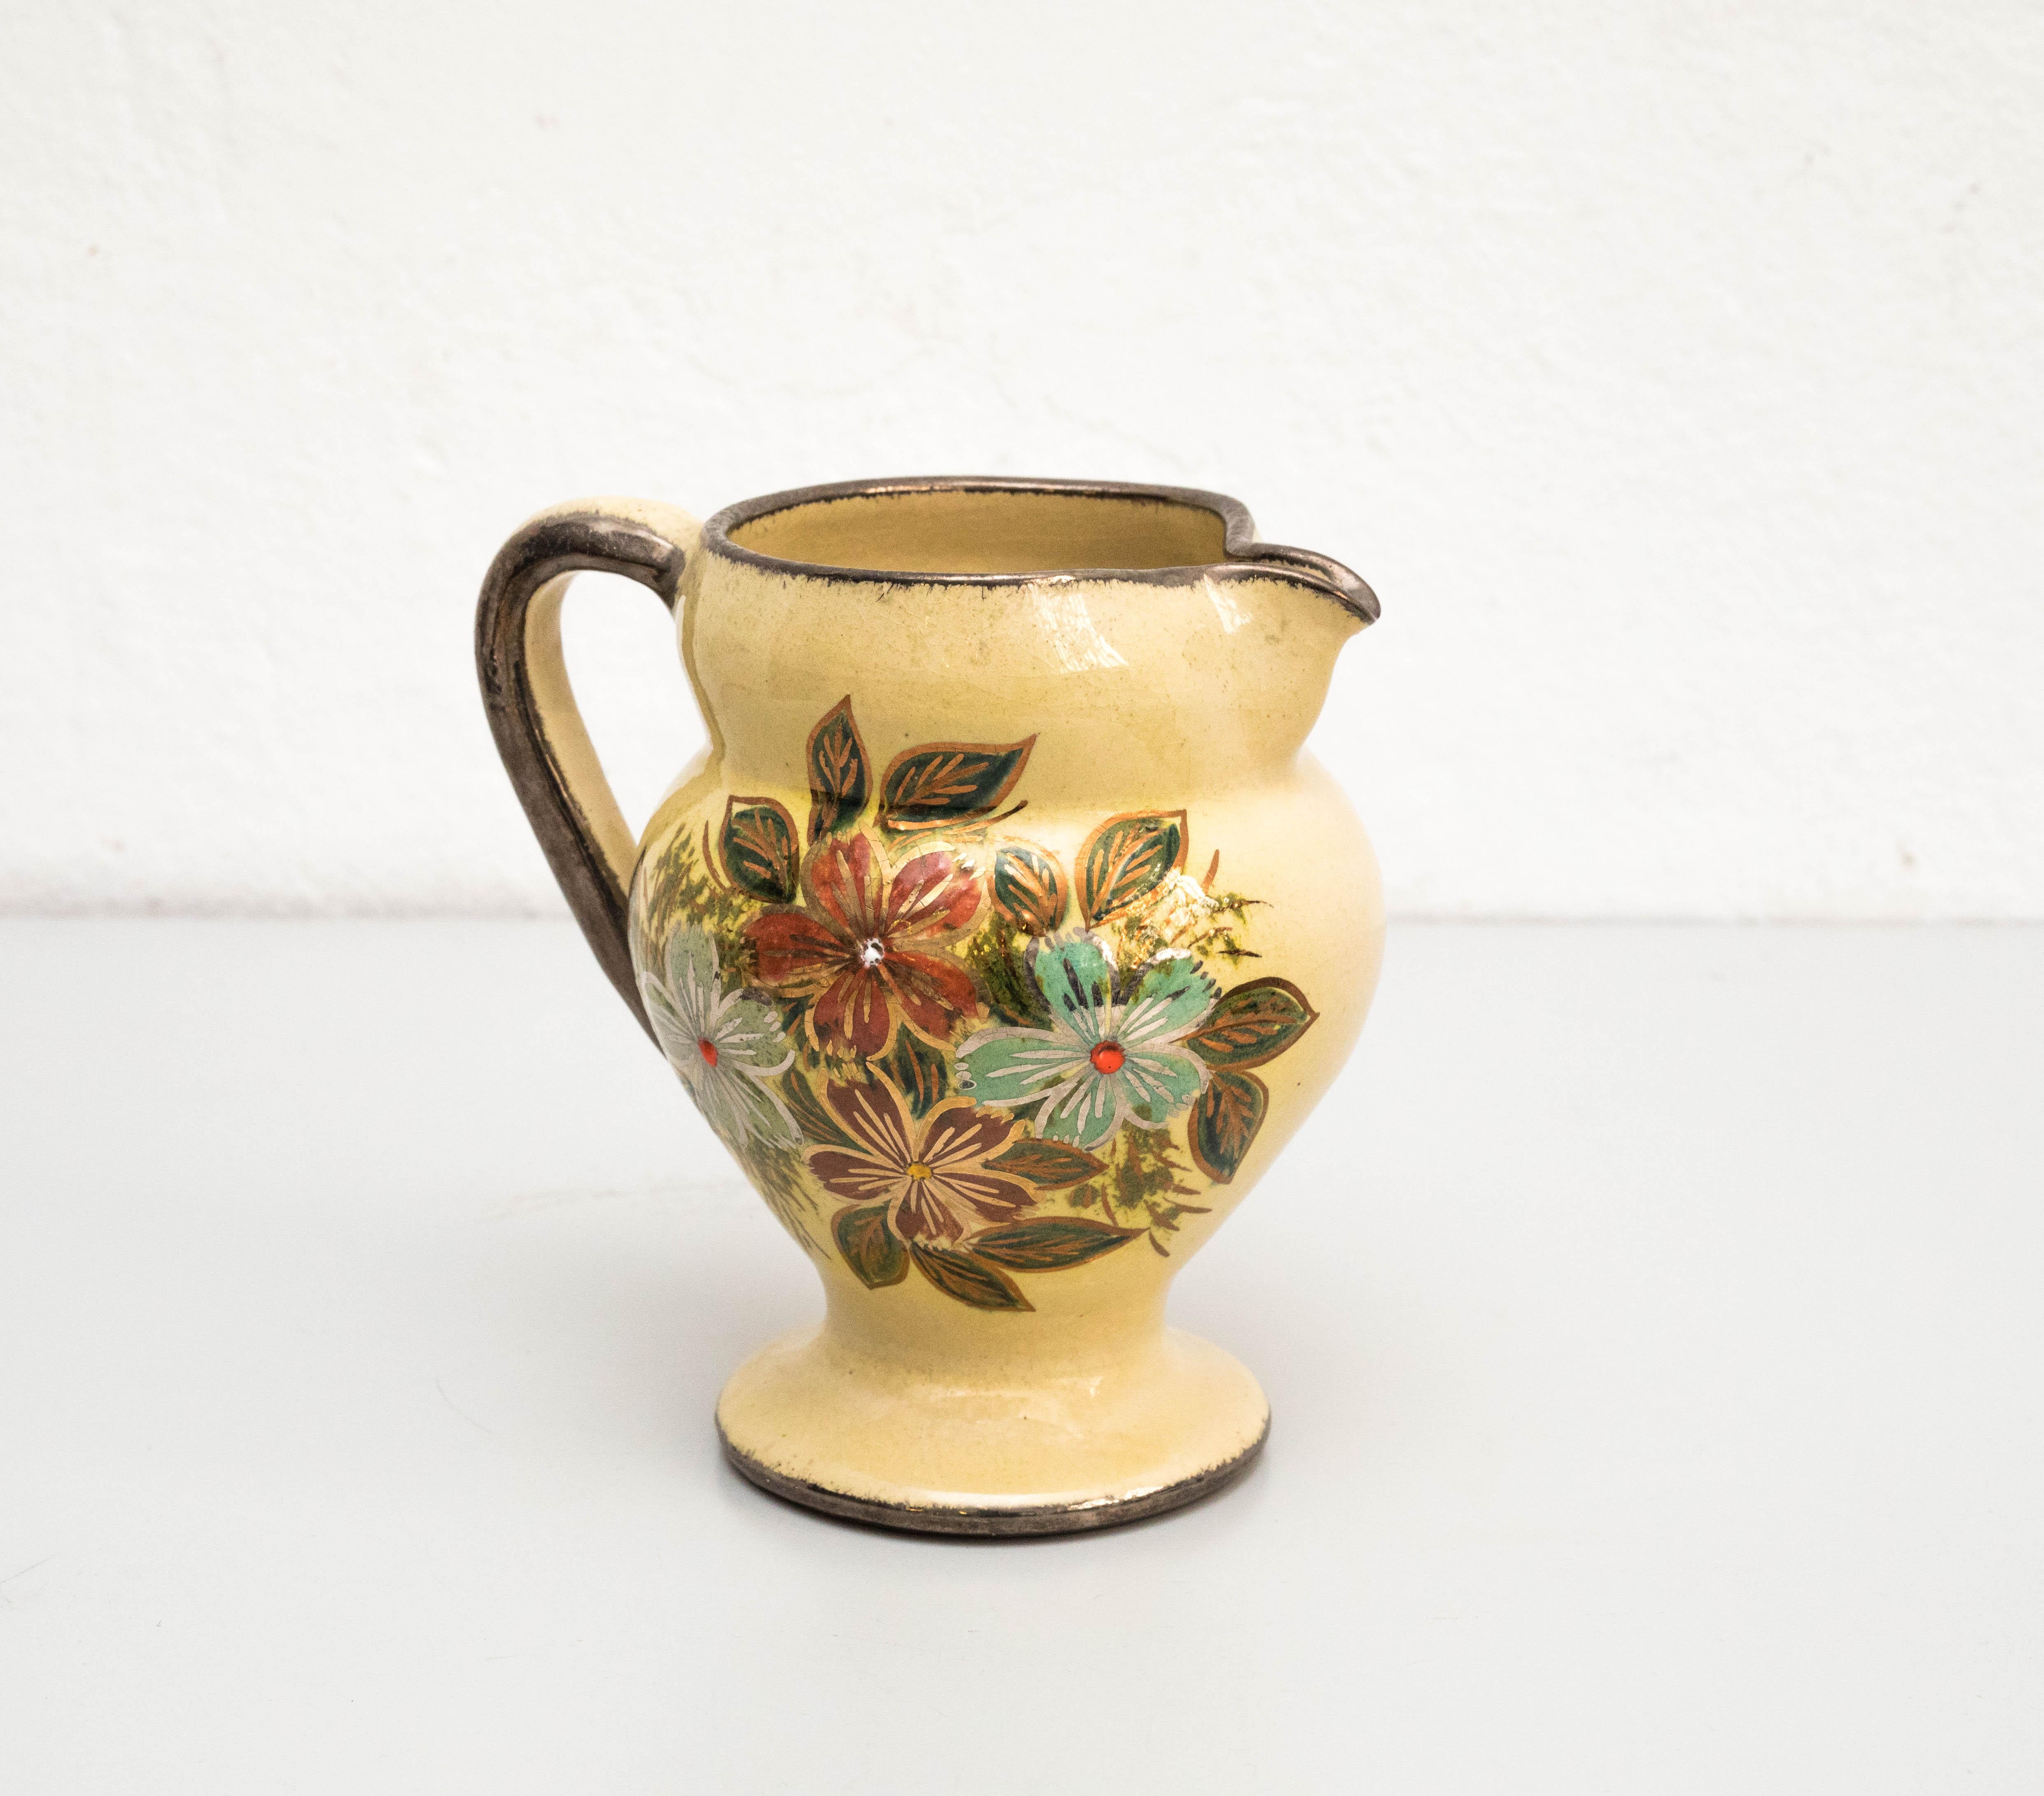 Ceramic hand painted vase by Catalan artist Diaz Costa, circa 1960.
Manufactured in Spain.
Signed.

In original condition, with minor wear consistent of age and use, preserving a beautiul patina.